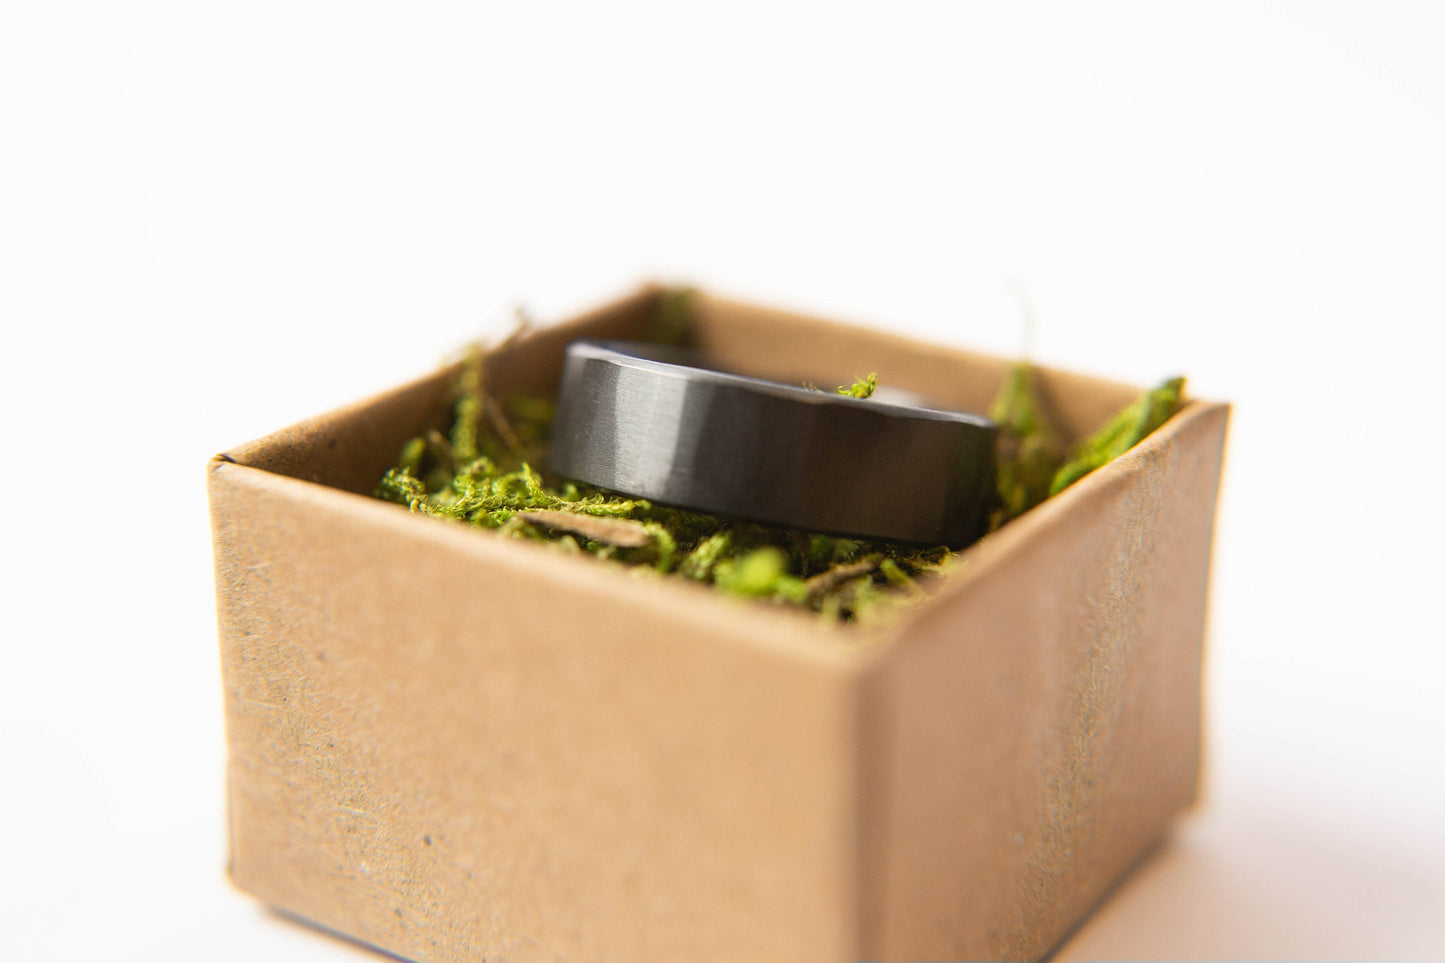 Mens black wedding band. This photo shows a lightly faceted black zirconium ring. (Horizontal in ring box with moss))